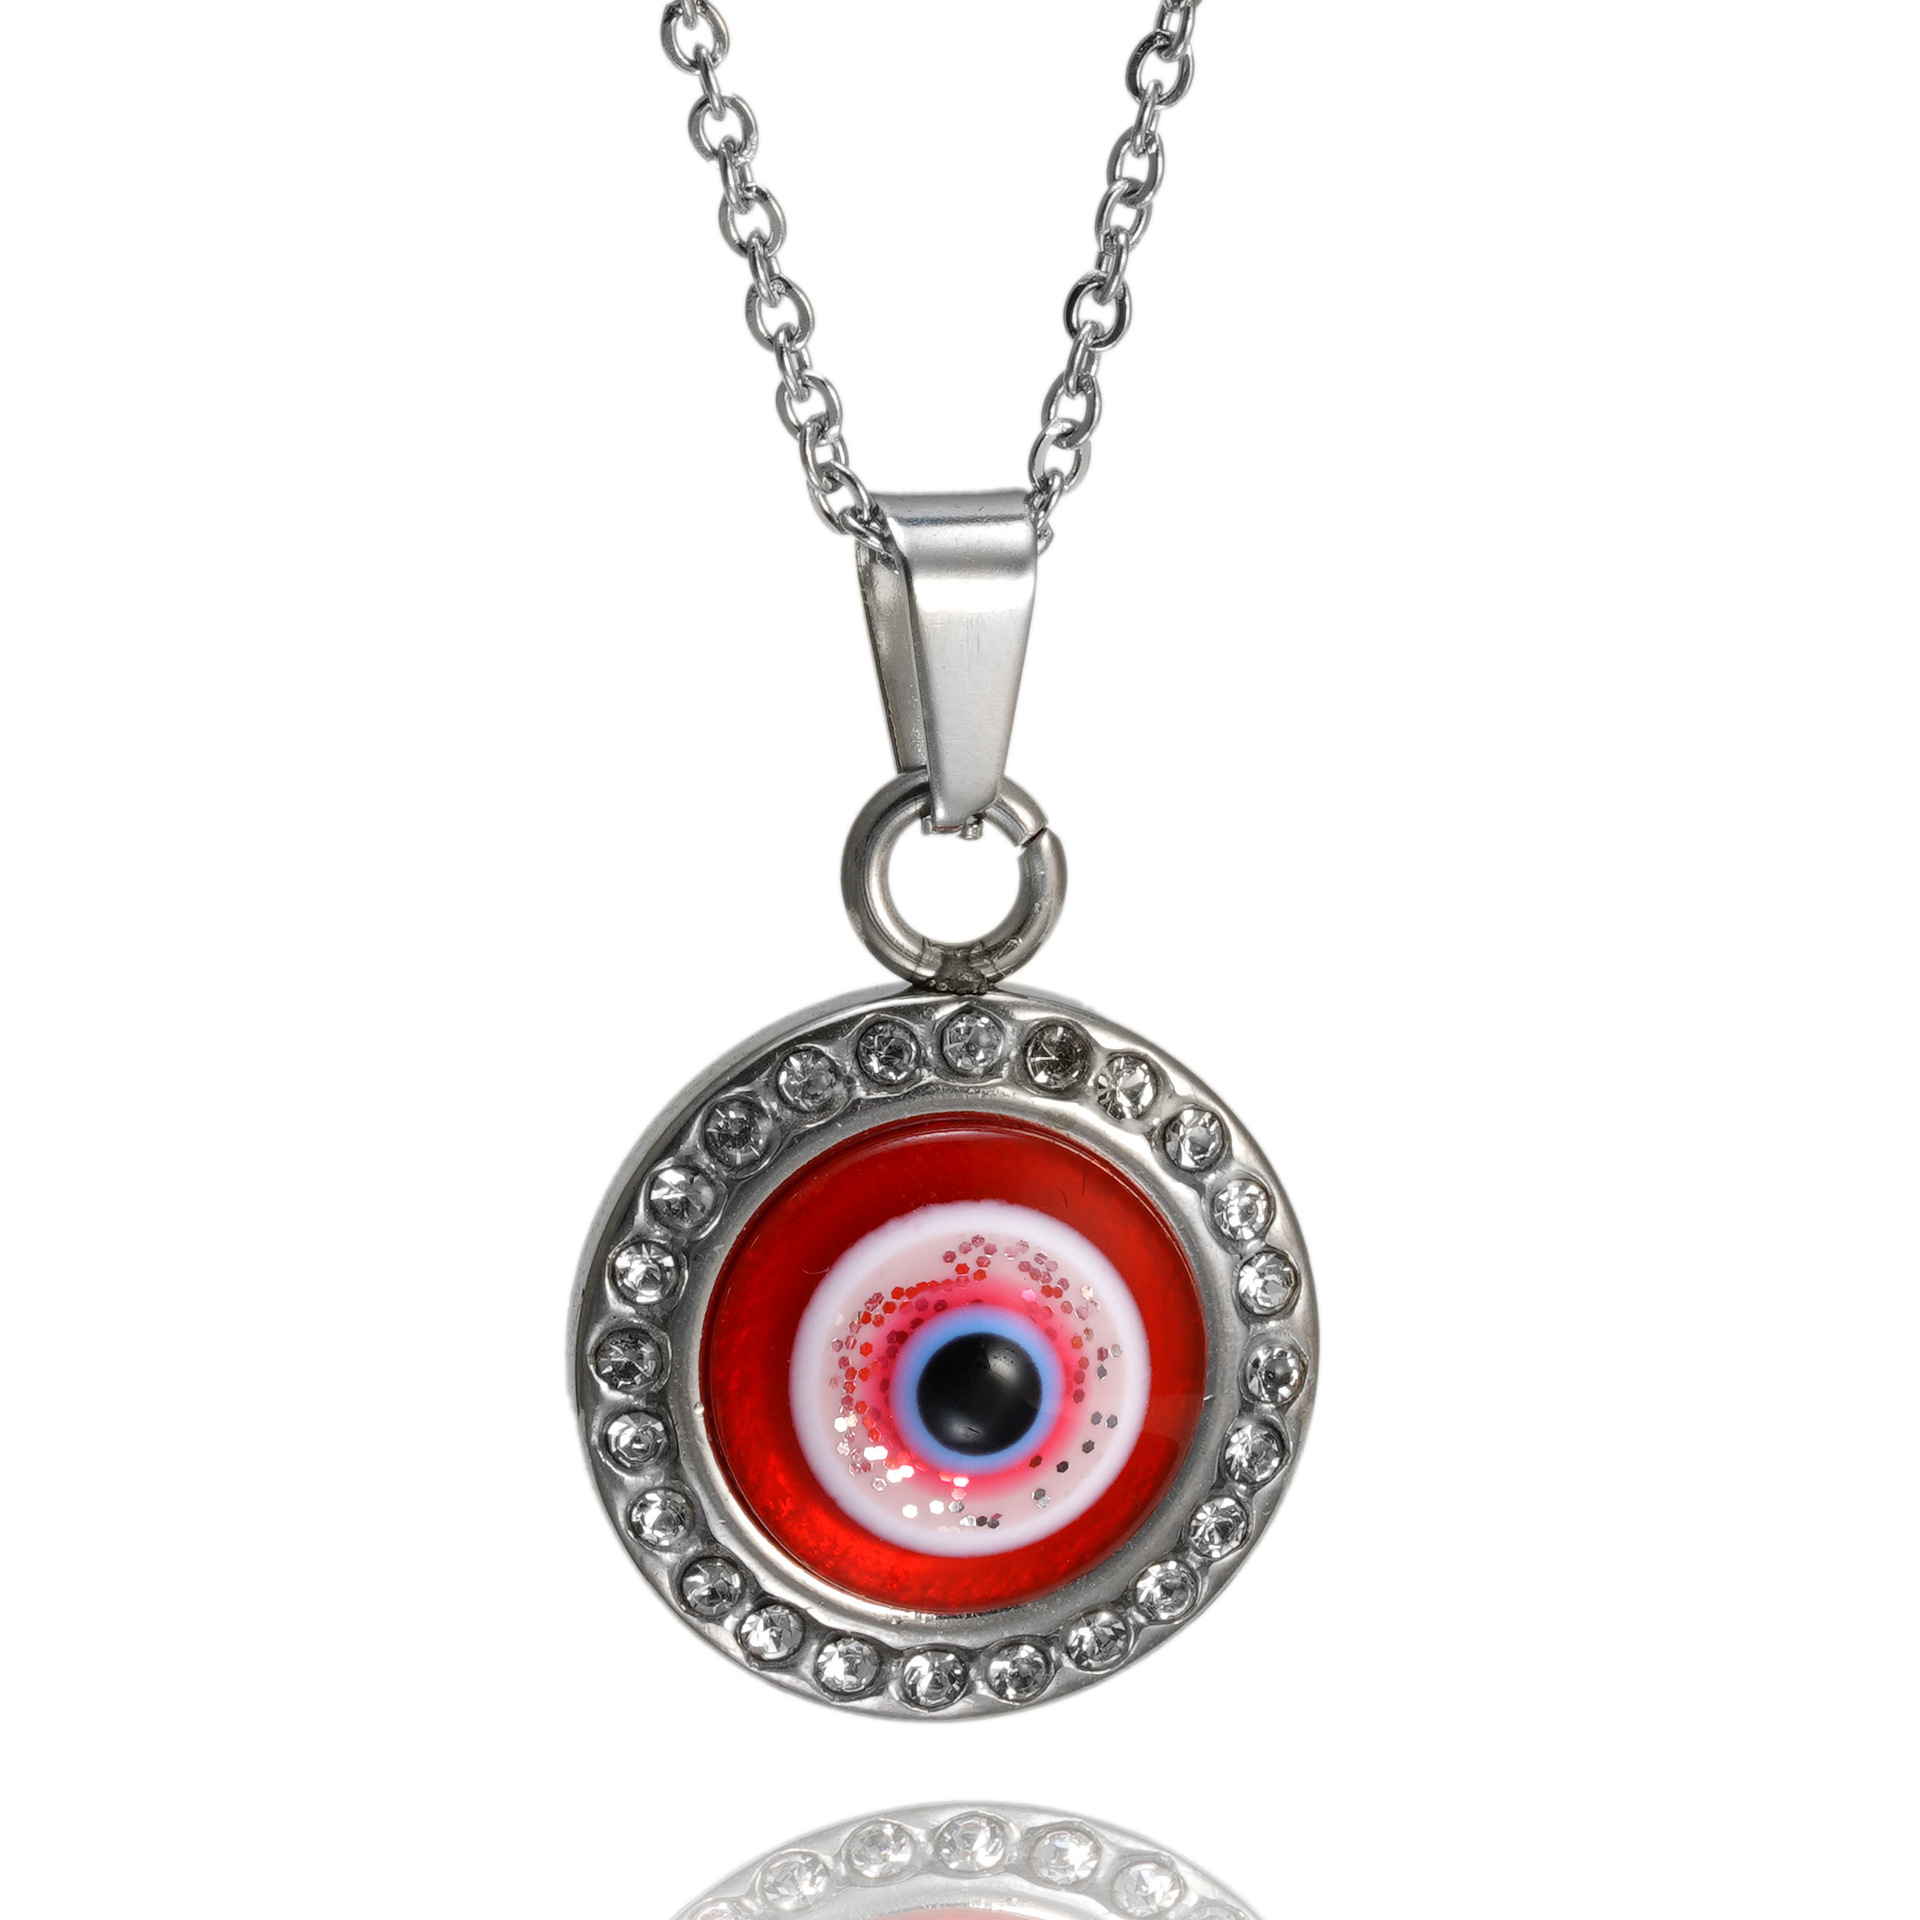 Steel red eye necklace